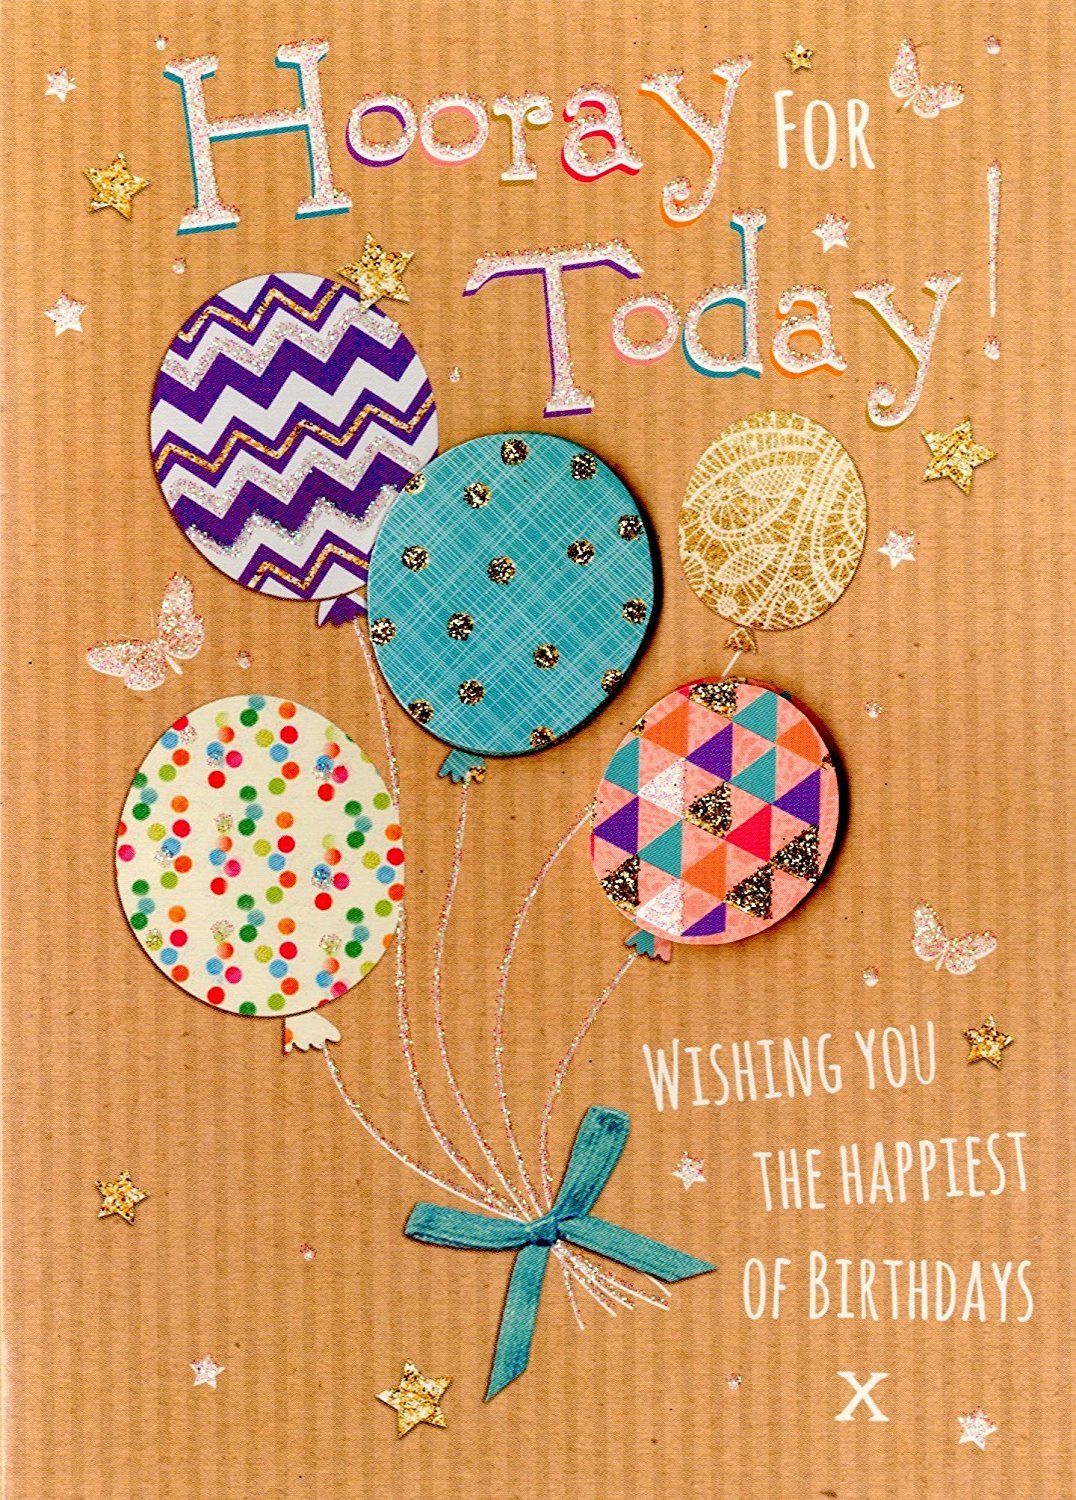 Hooray For Today Birthday Greeting Card Second Nature Yours Truly Card ...